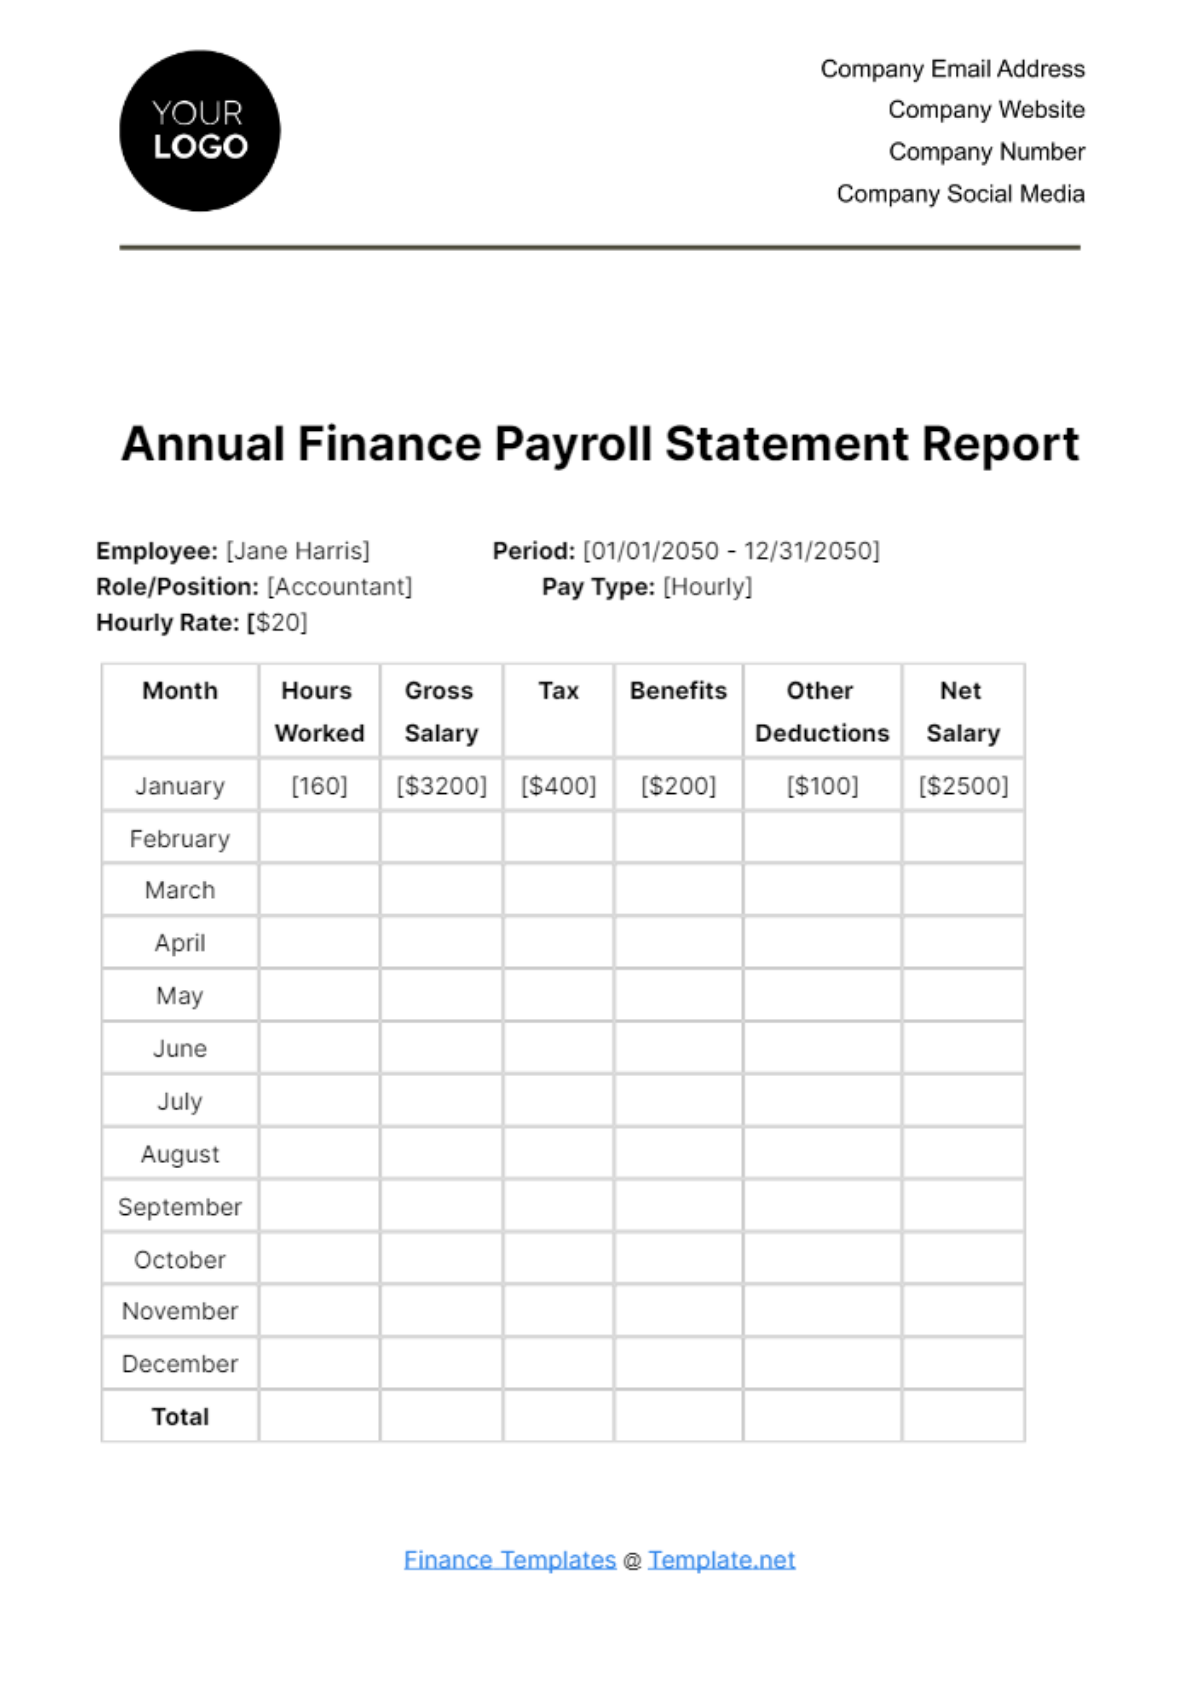 Annual Finance Payroll Statement Report Template